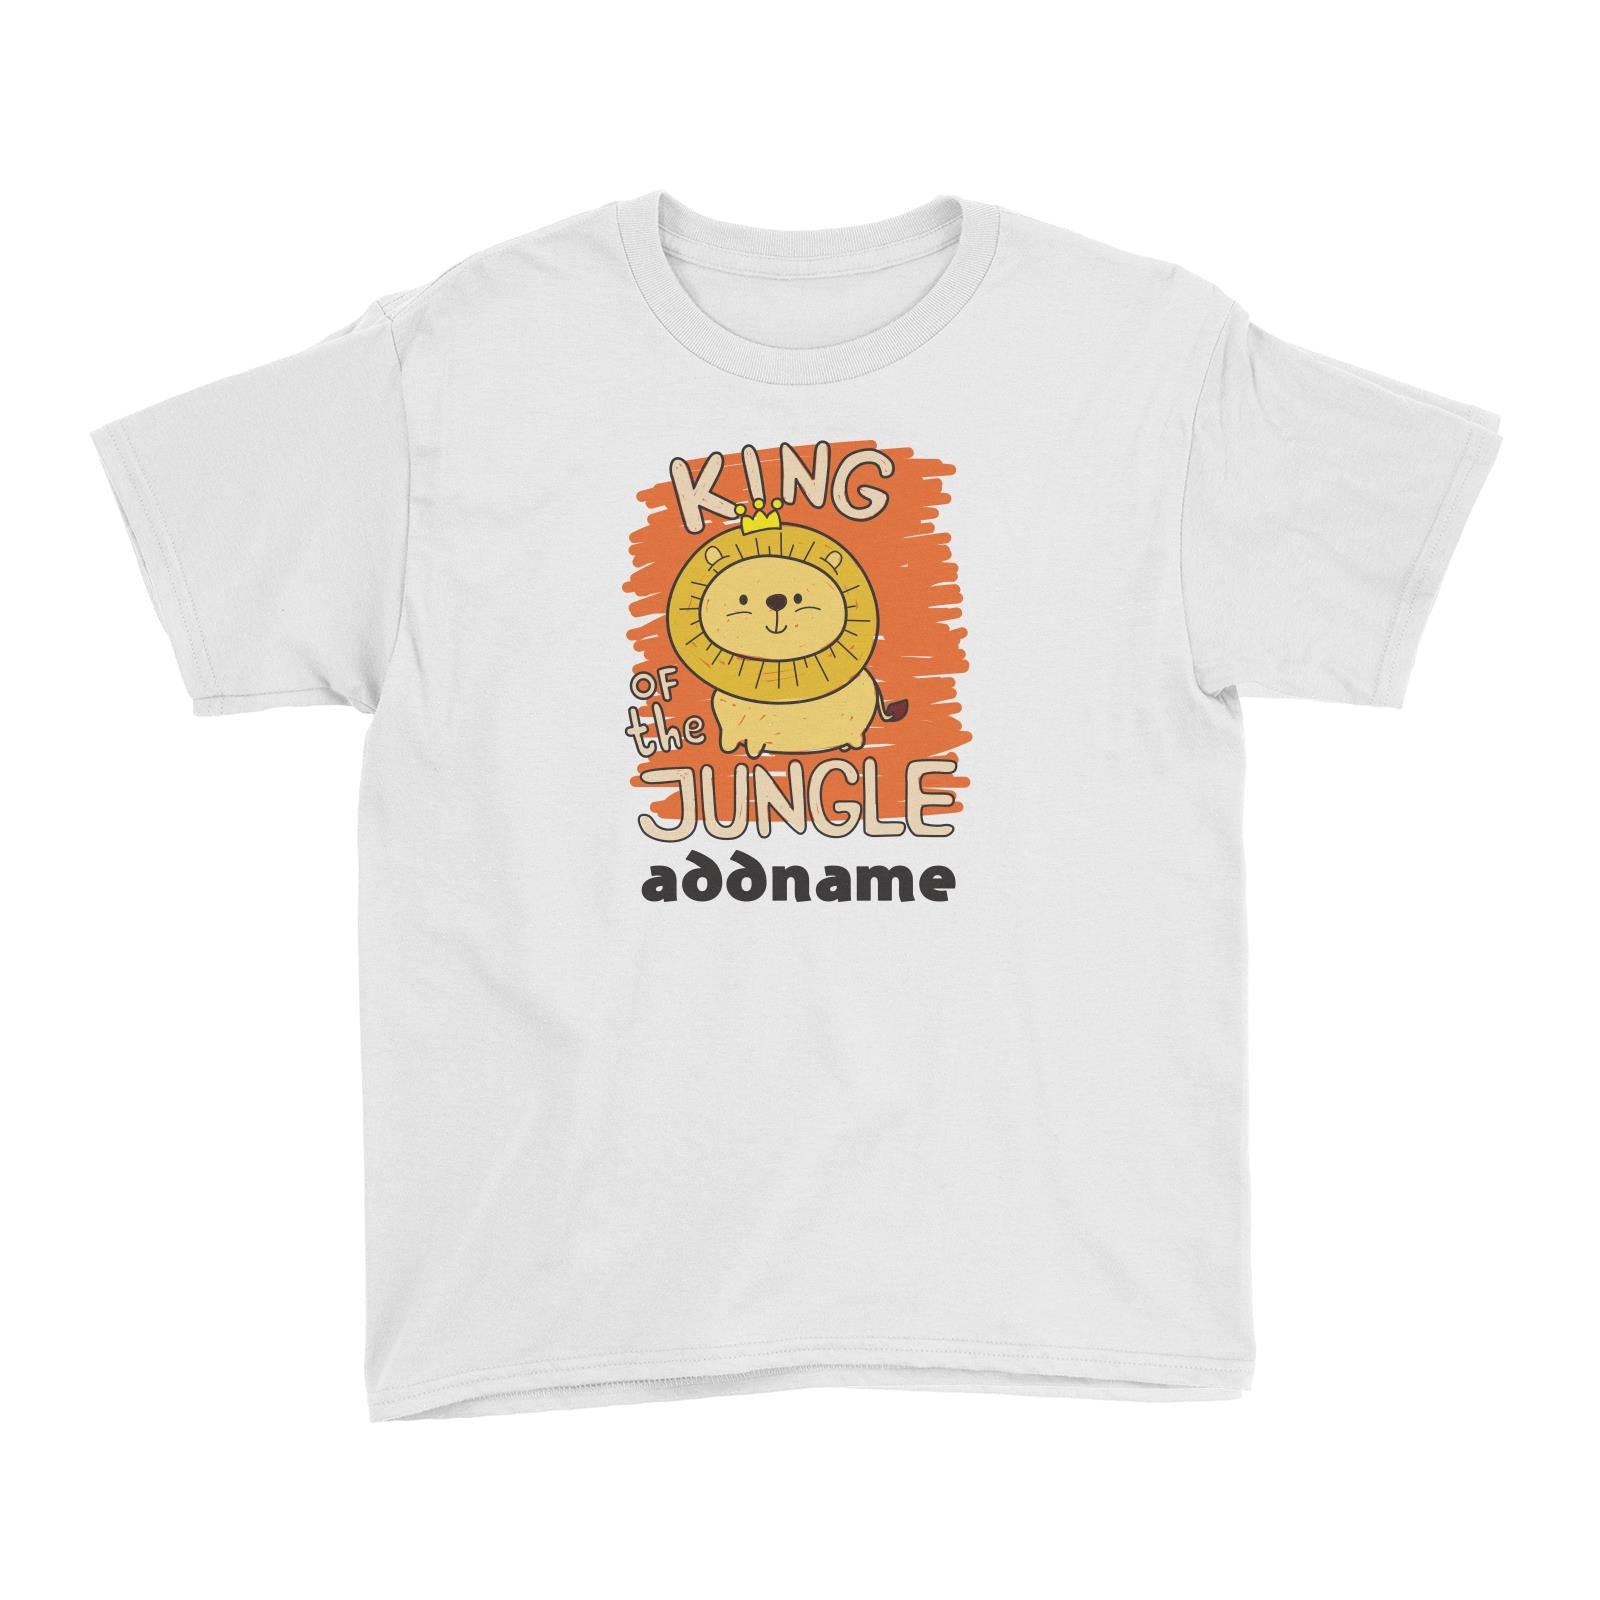 Cool Cute Animals Lion King Of The Jungle Addname Kid's T-Shirts